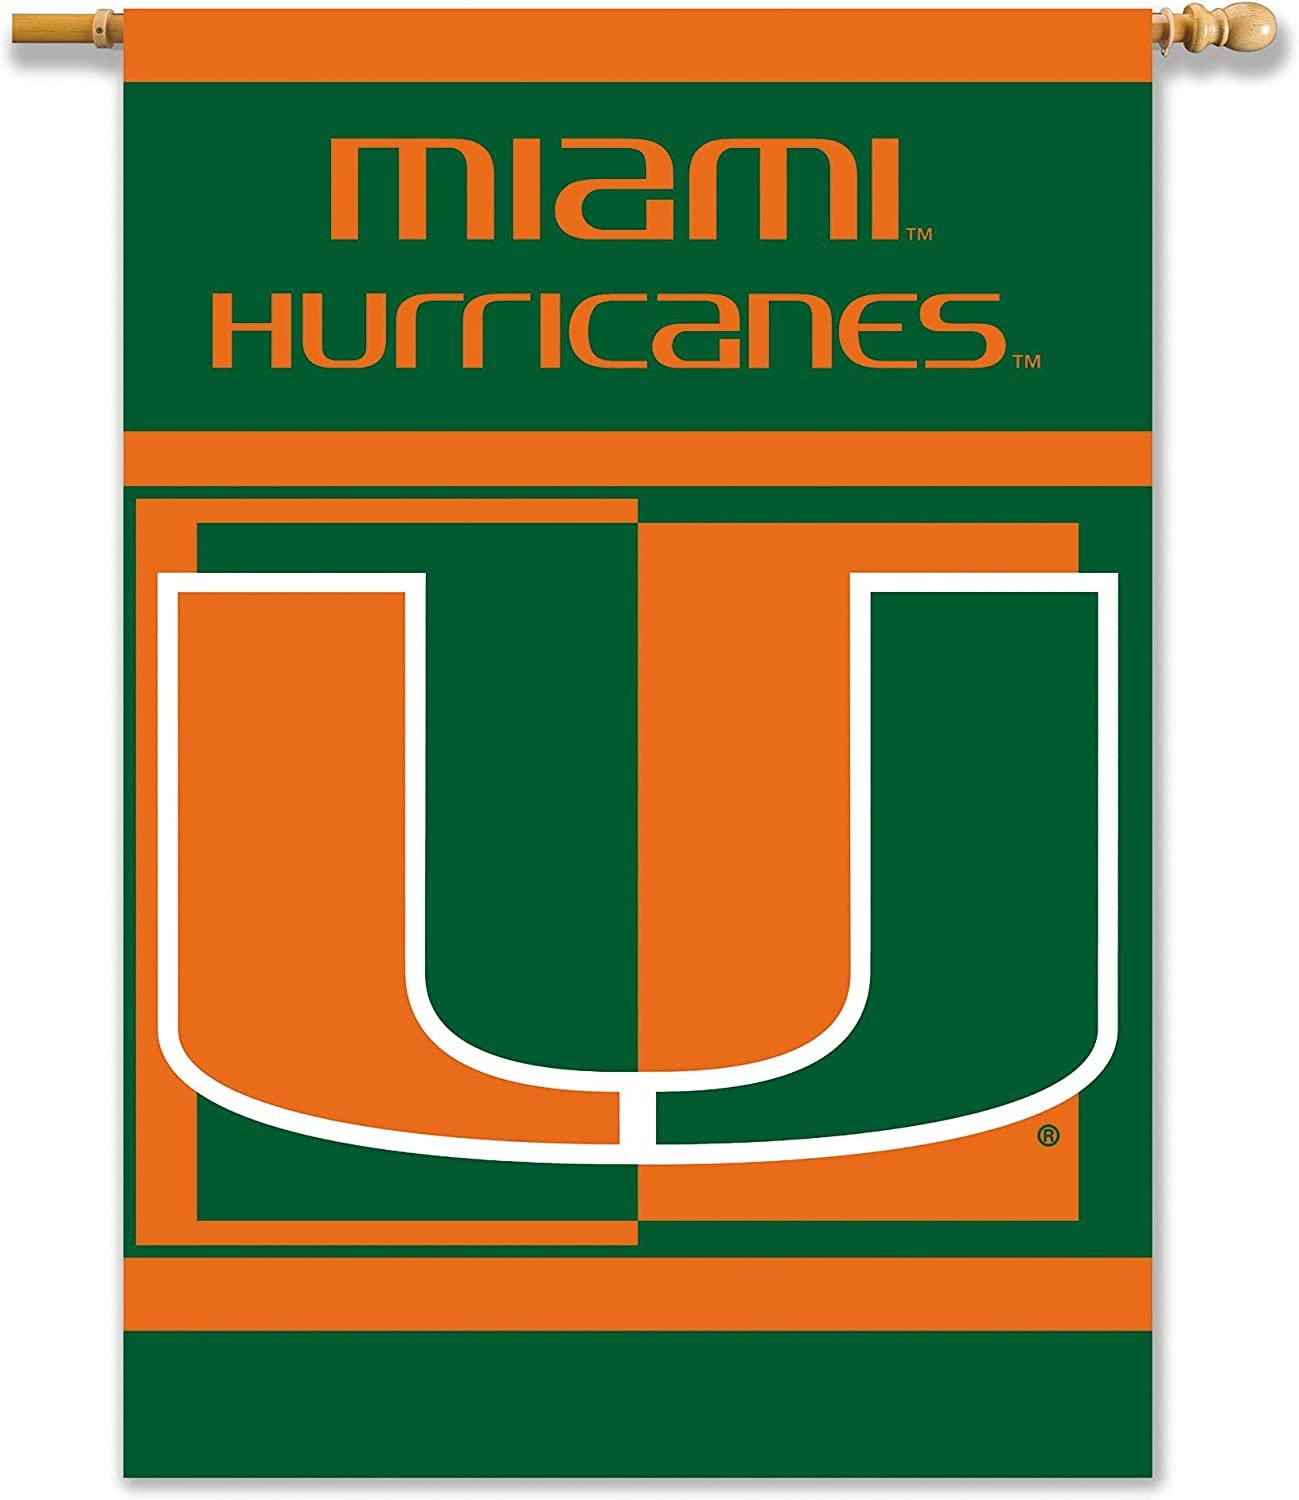 University of Miami Hurricanes Premium 2-Sided 28x40 Inch Banner Flag with Pole Sleeve